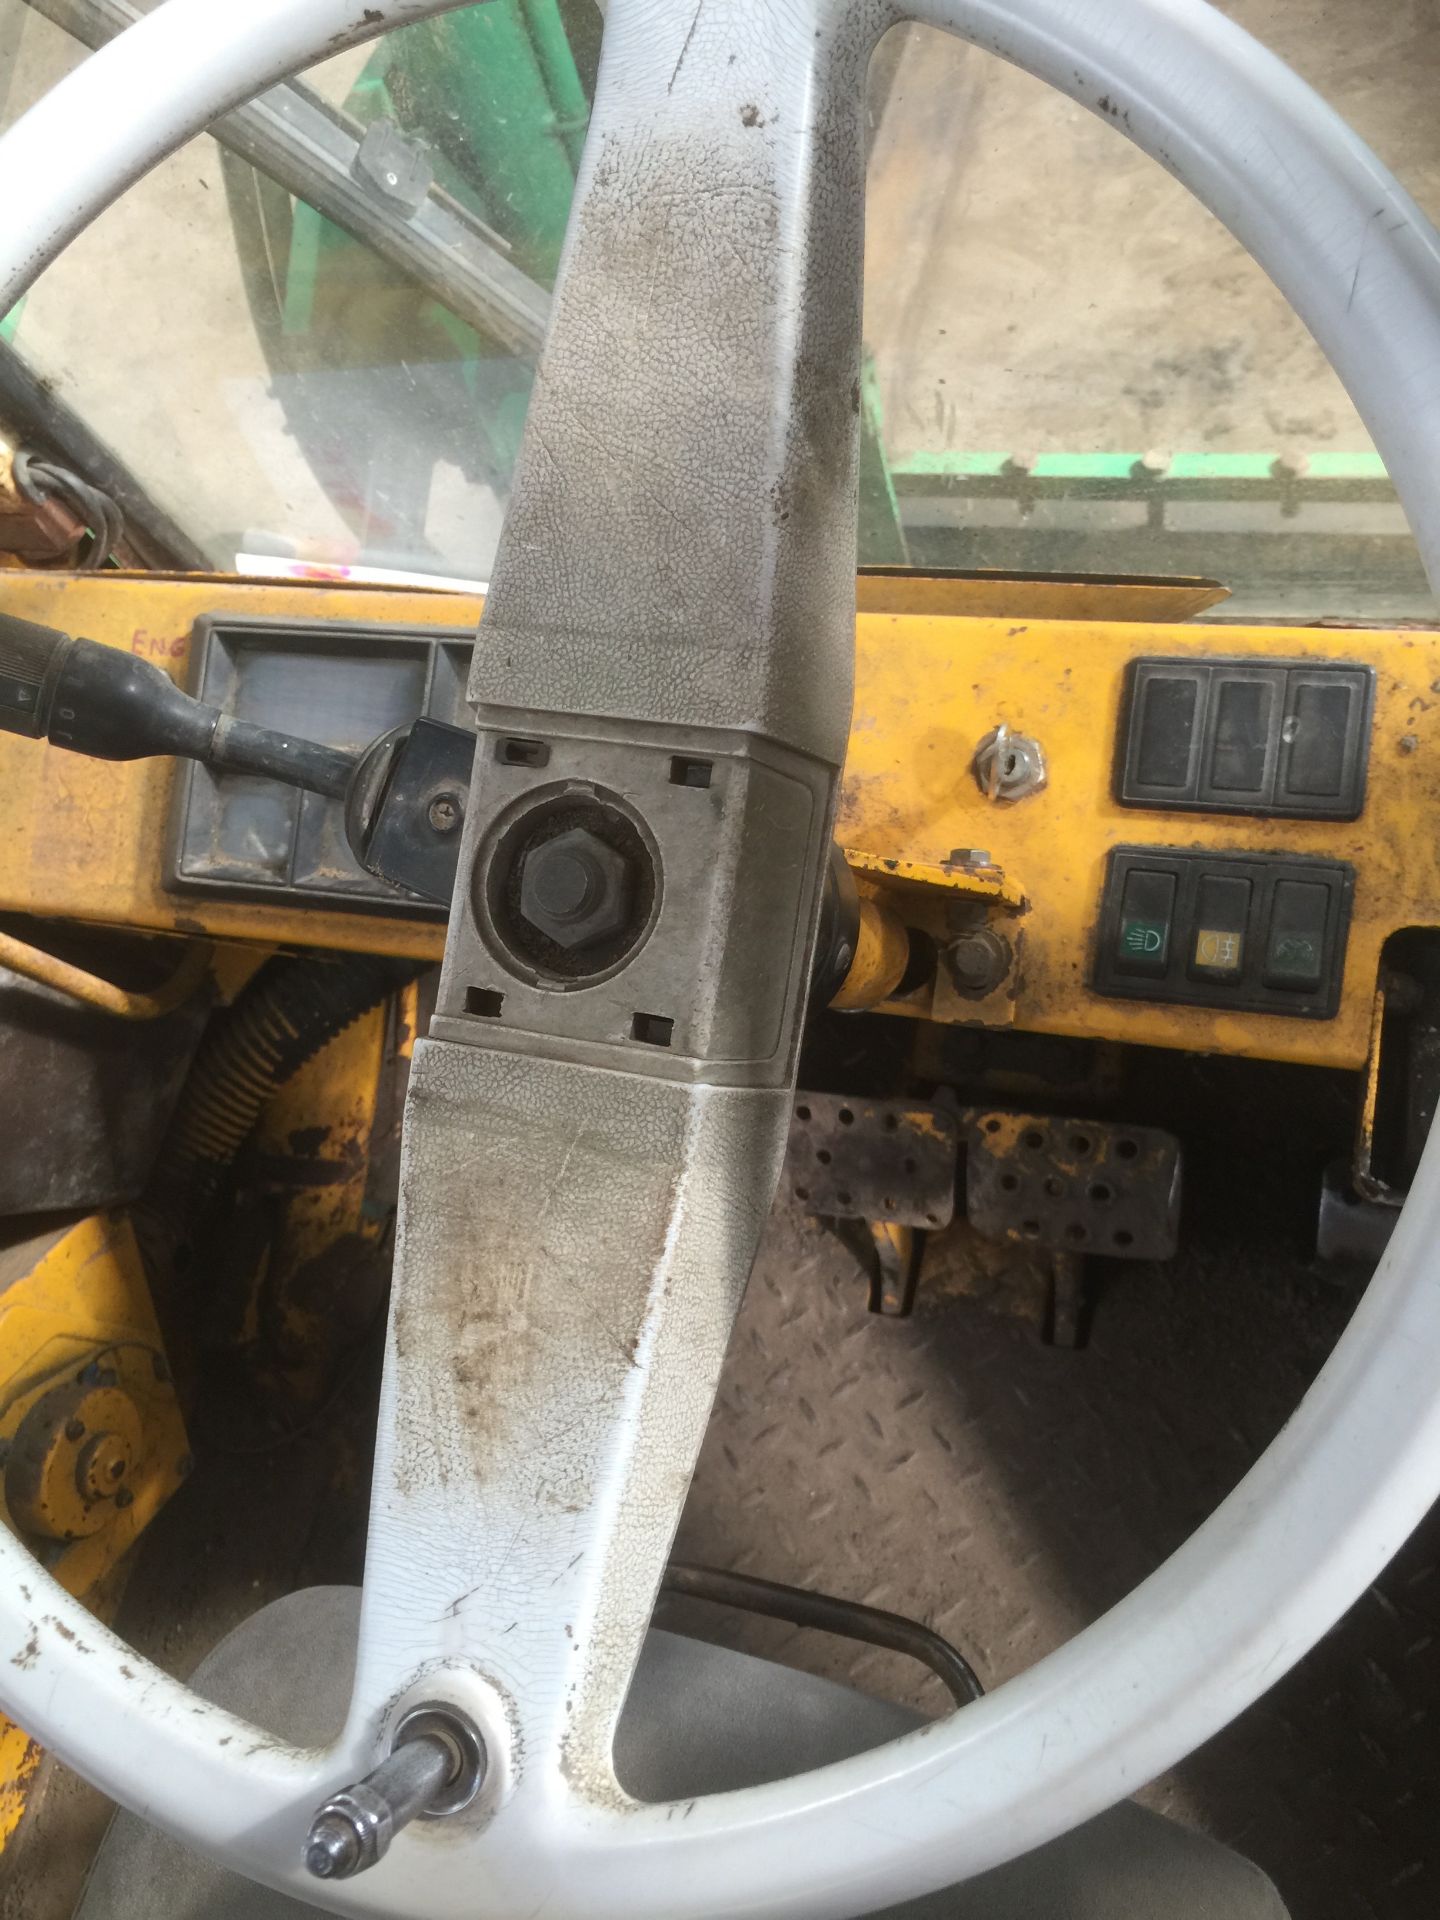 JCB 926 Lift Truck 4282 hours - old but in good working order, starts first time. (extension tines - Image 7 of 11